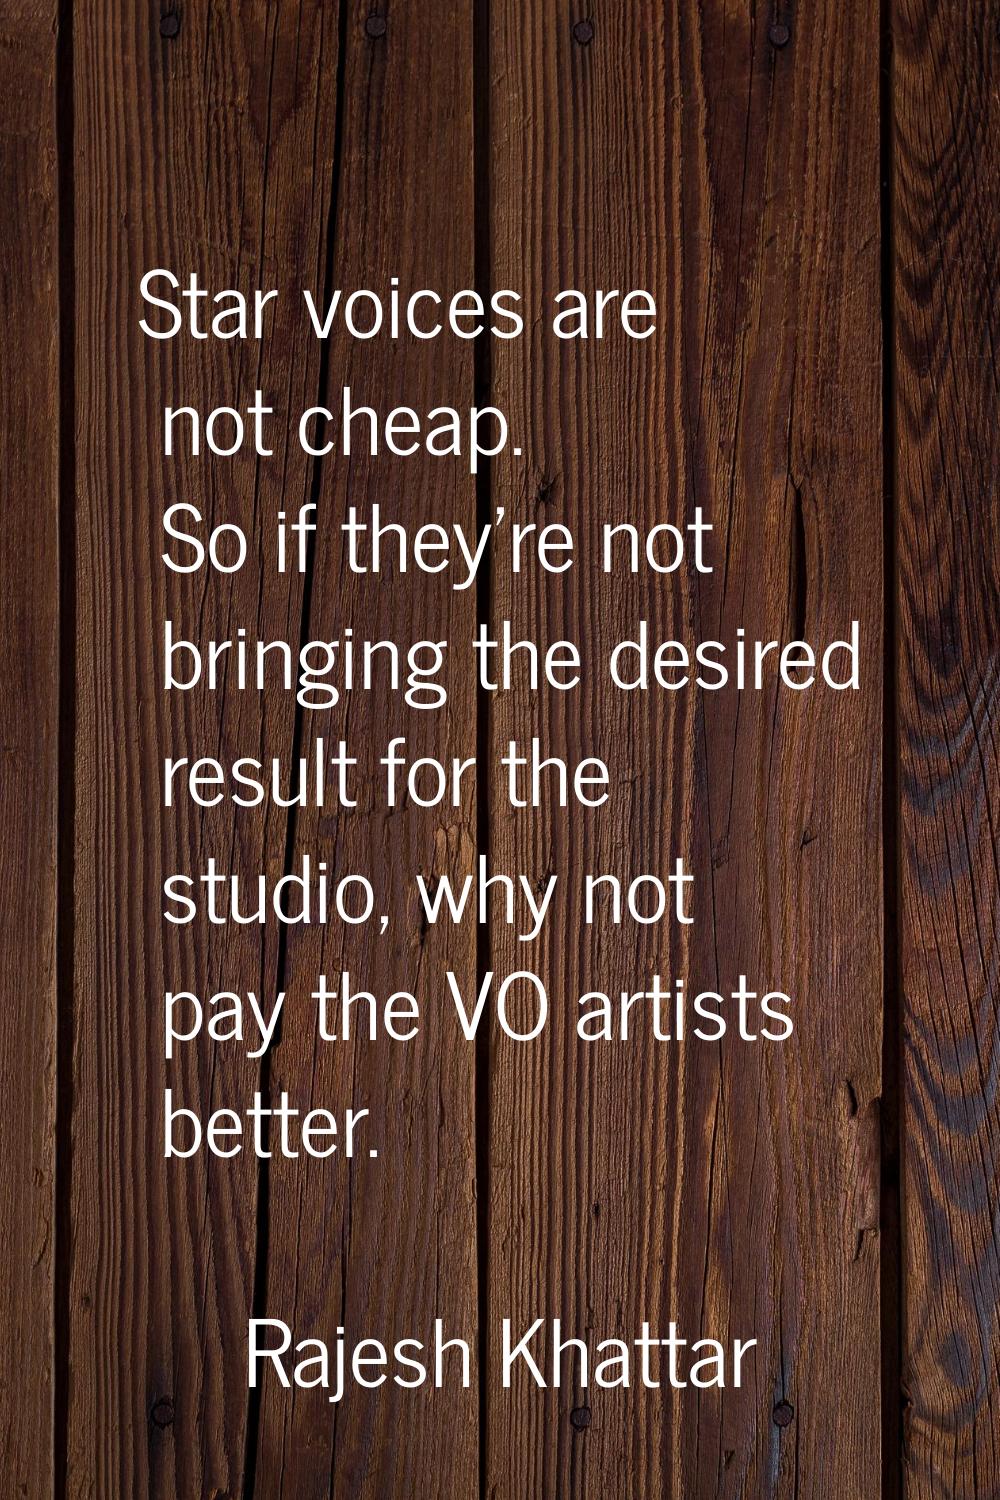 Star voices are not cheap. So if they're not bringing the desired result for the studio, why not pa